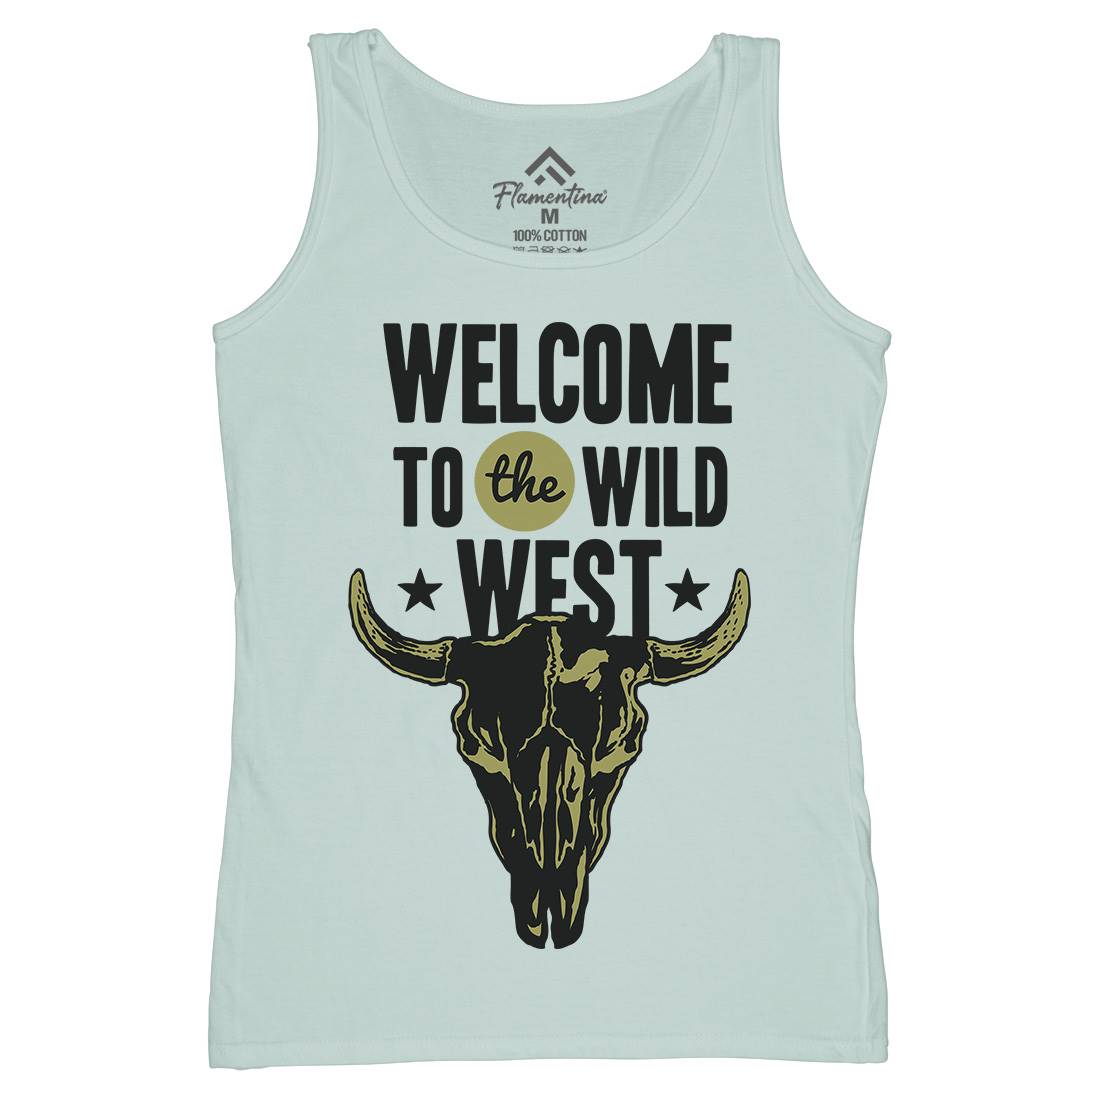 Welcome To The Wild West Womens Organic Tank Top Vest American A393